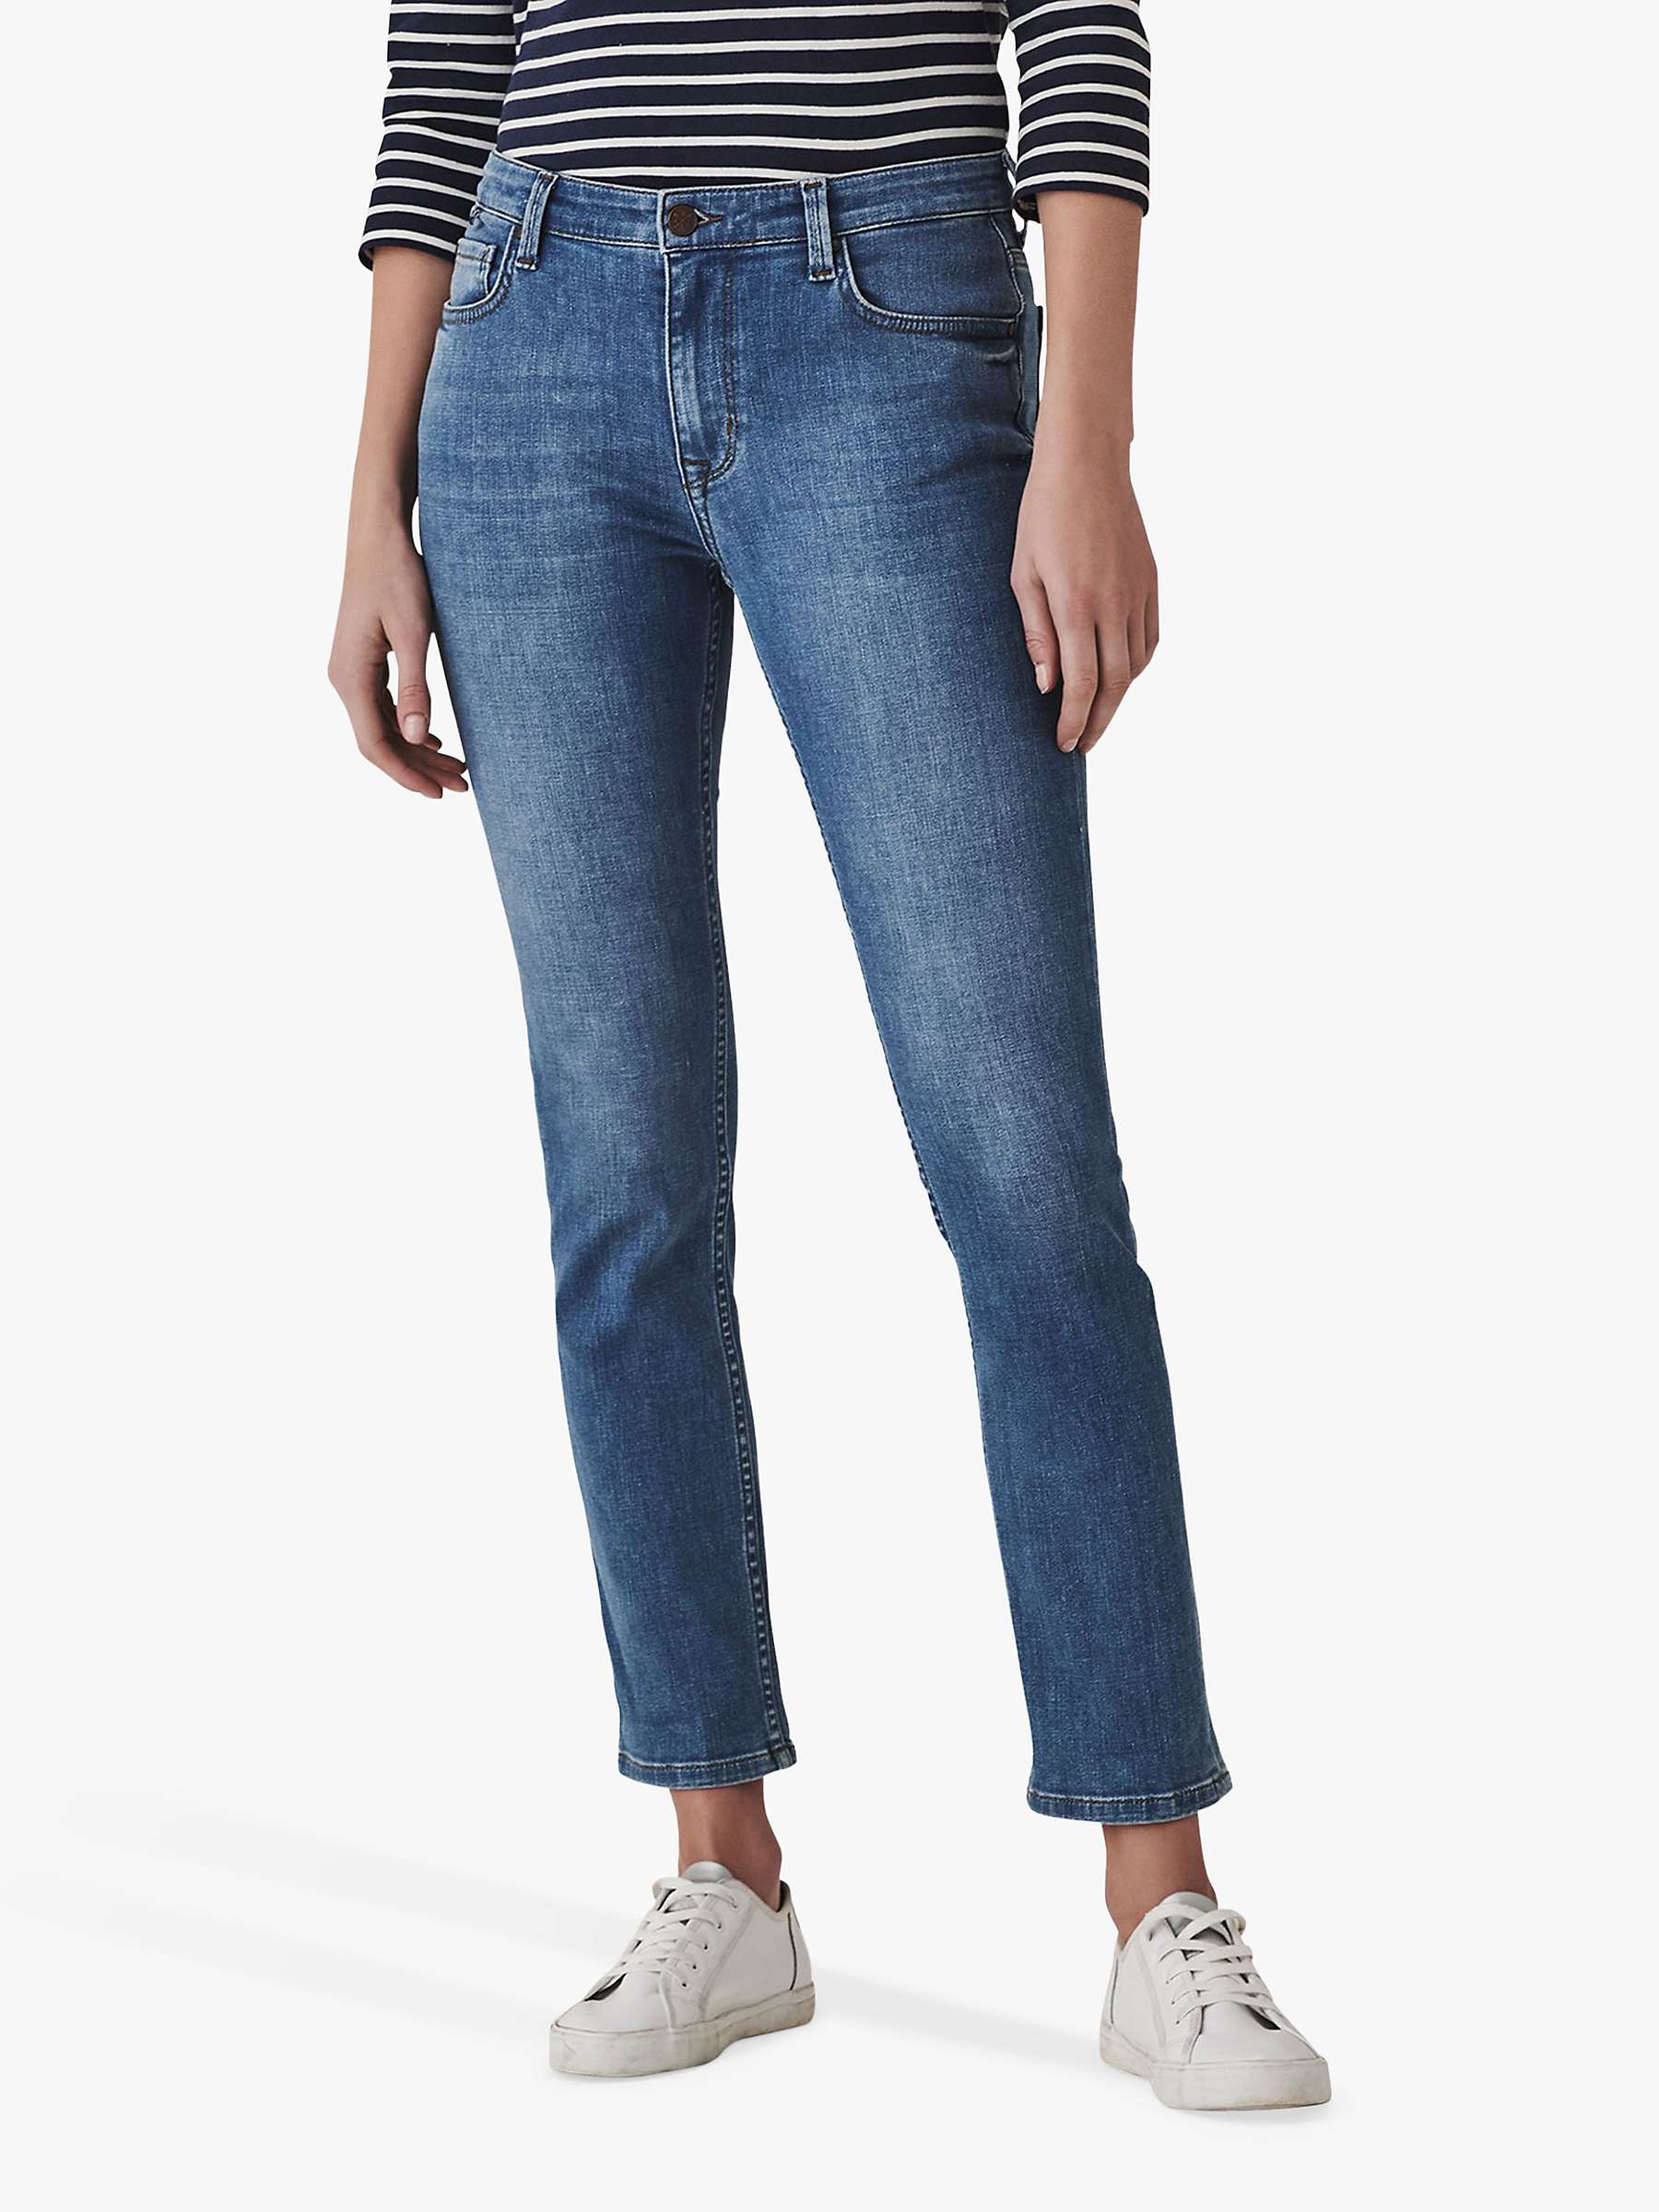 Buy Crew Clothing Mid Rise Straight Cut Jeans, Light Blue Online at johnlewis.com